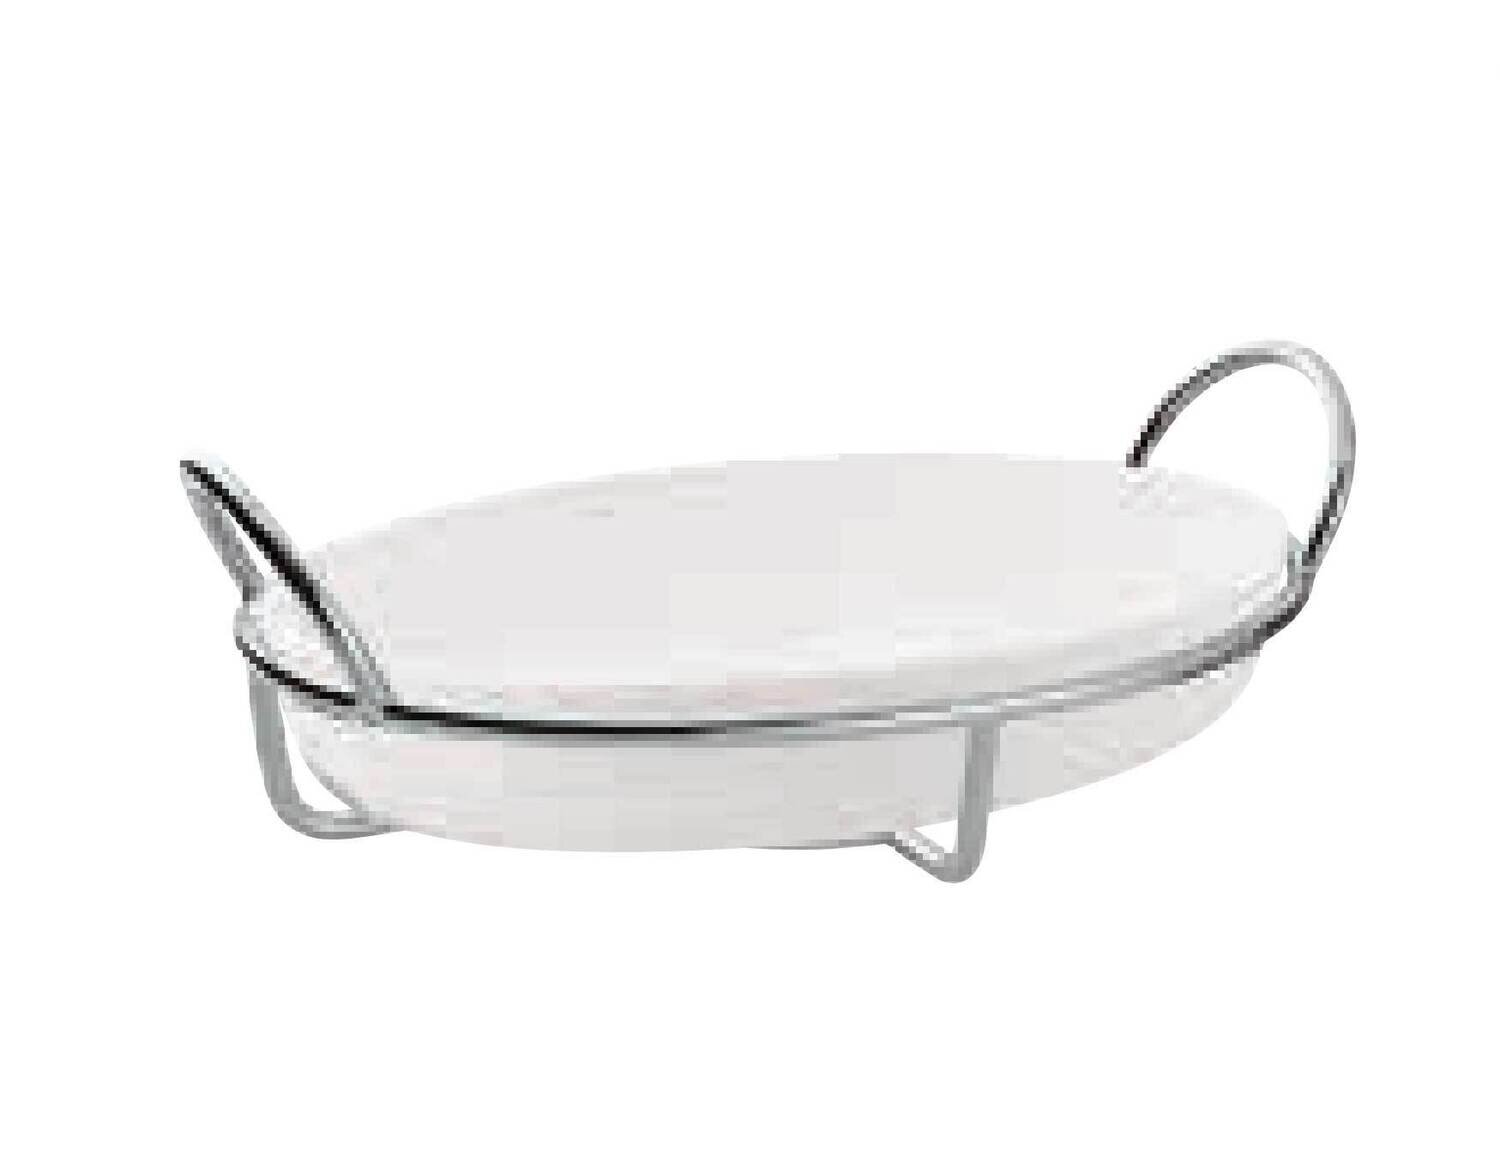 Ercuis Latitude Oval Gratin Dish Without Cover 15.75 x 10.25 Inch Silver Plated F542493-11